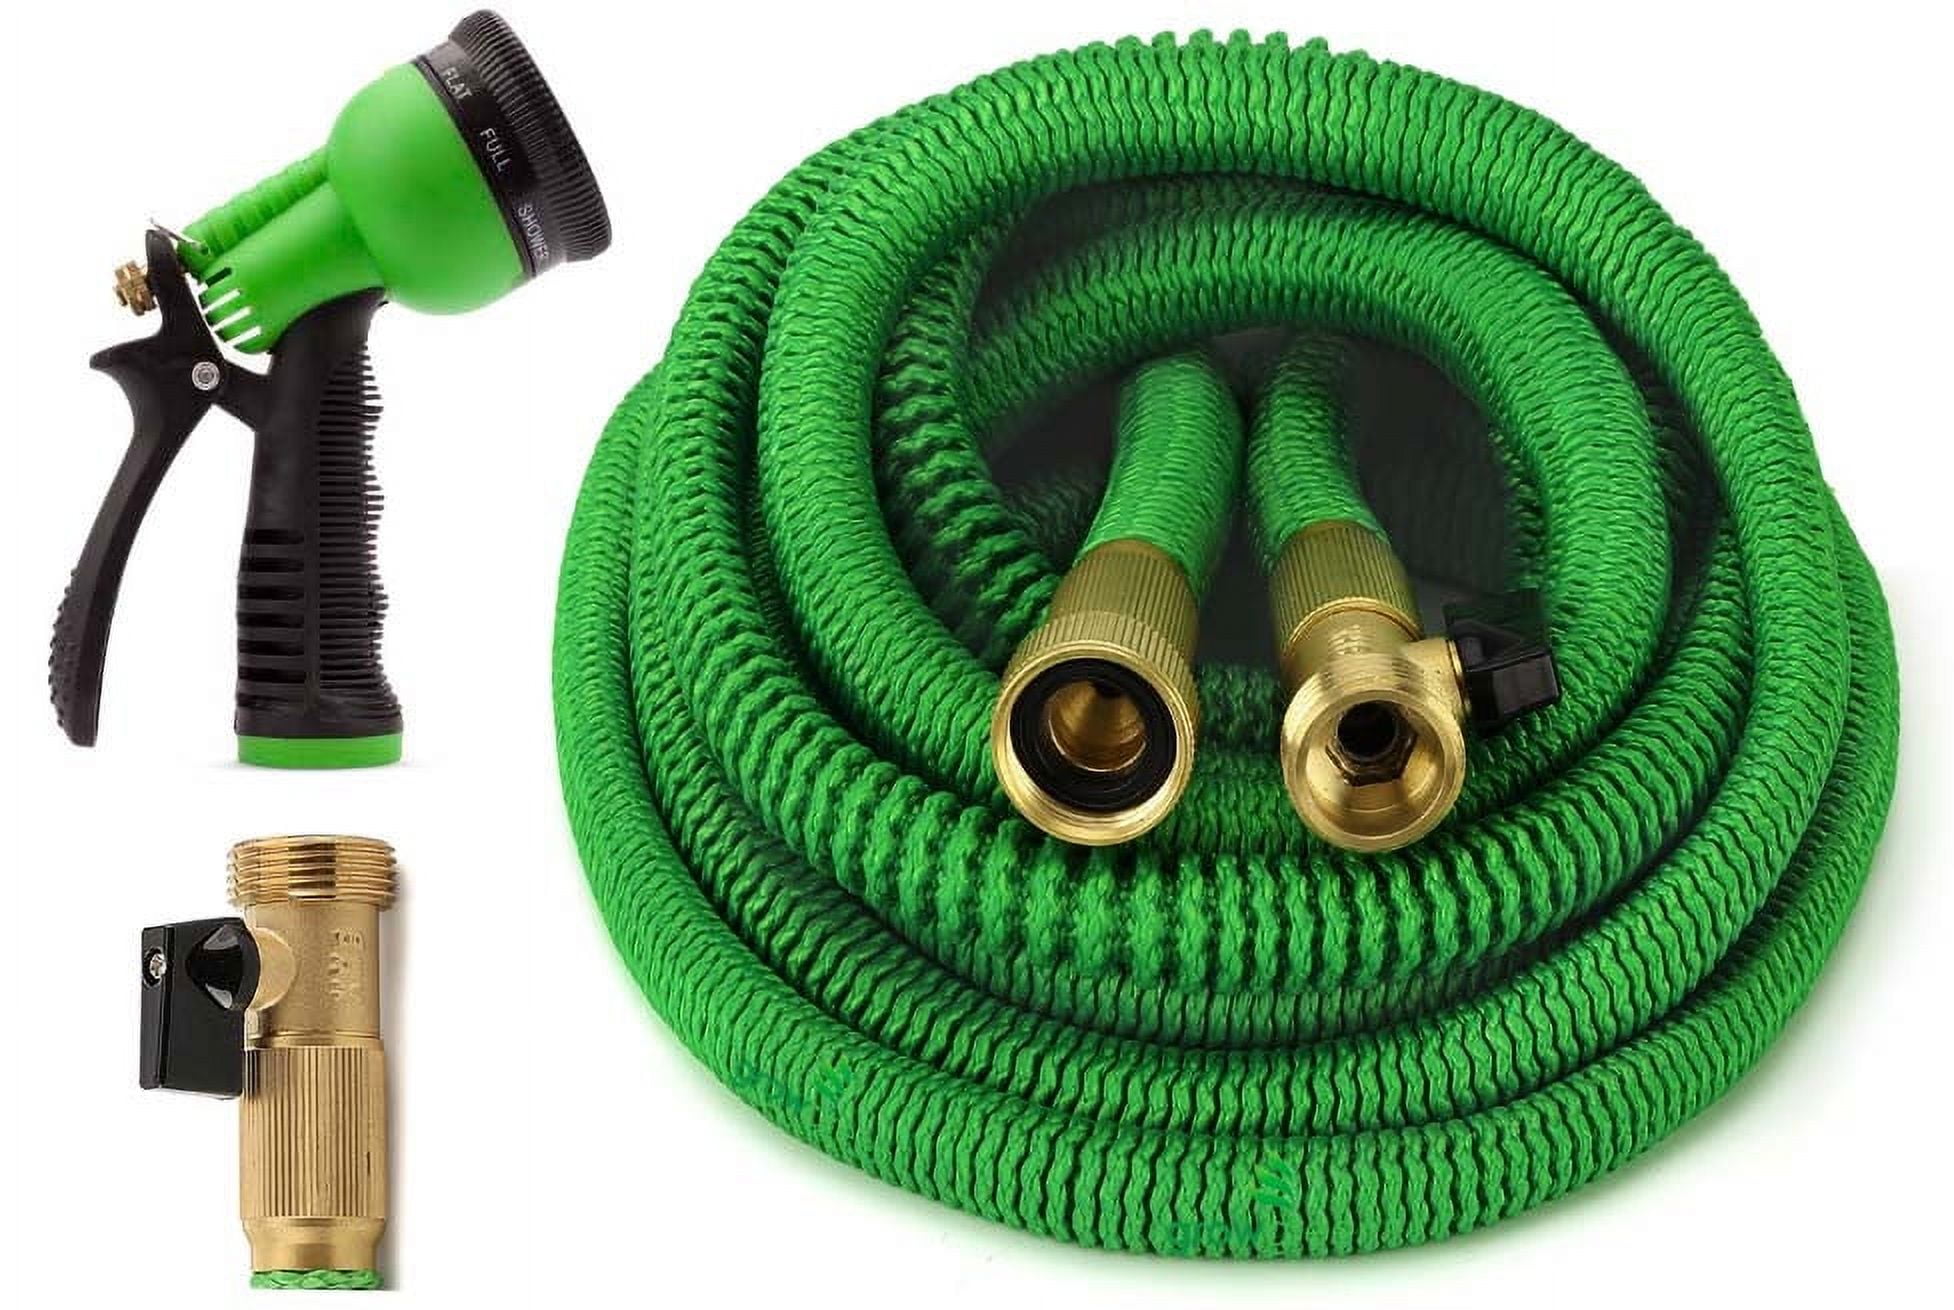 GrowGreen 50' Expandable Garden Water Hose Set with Nozzle